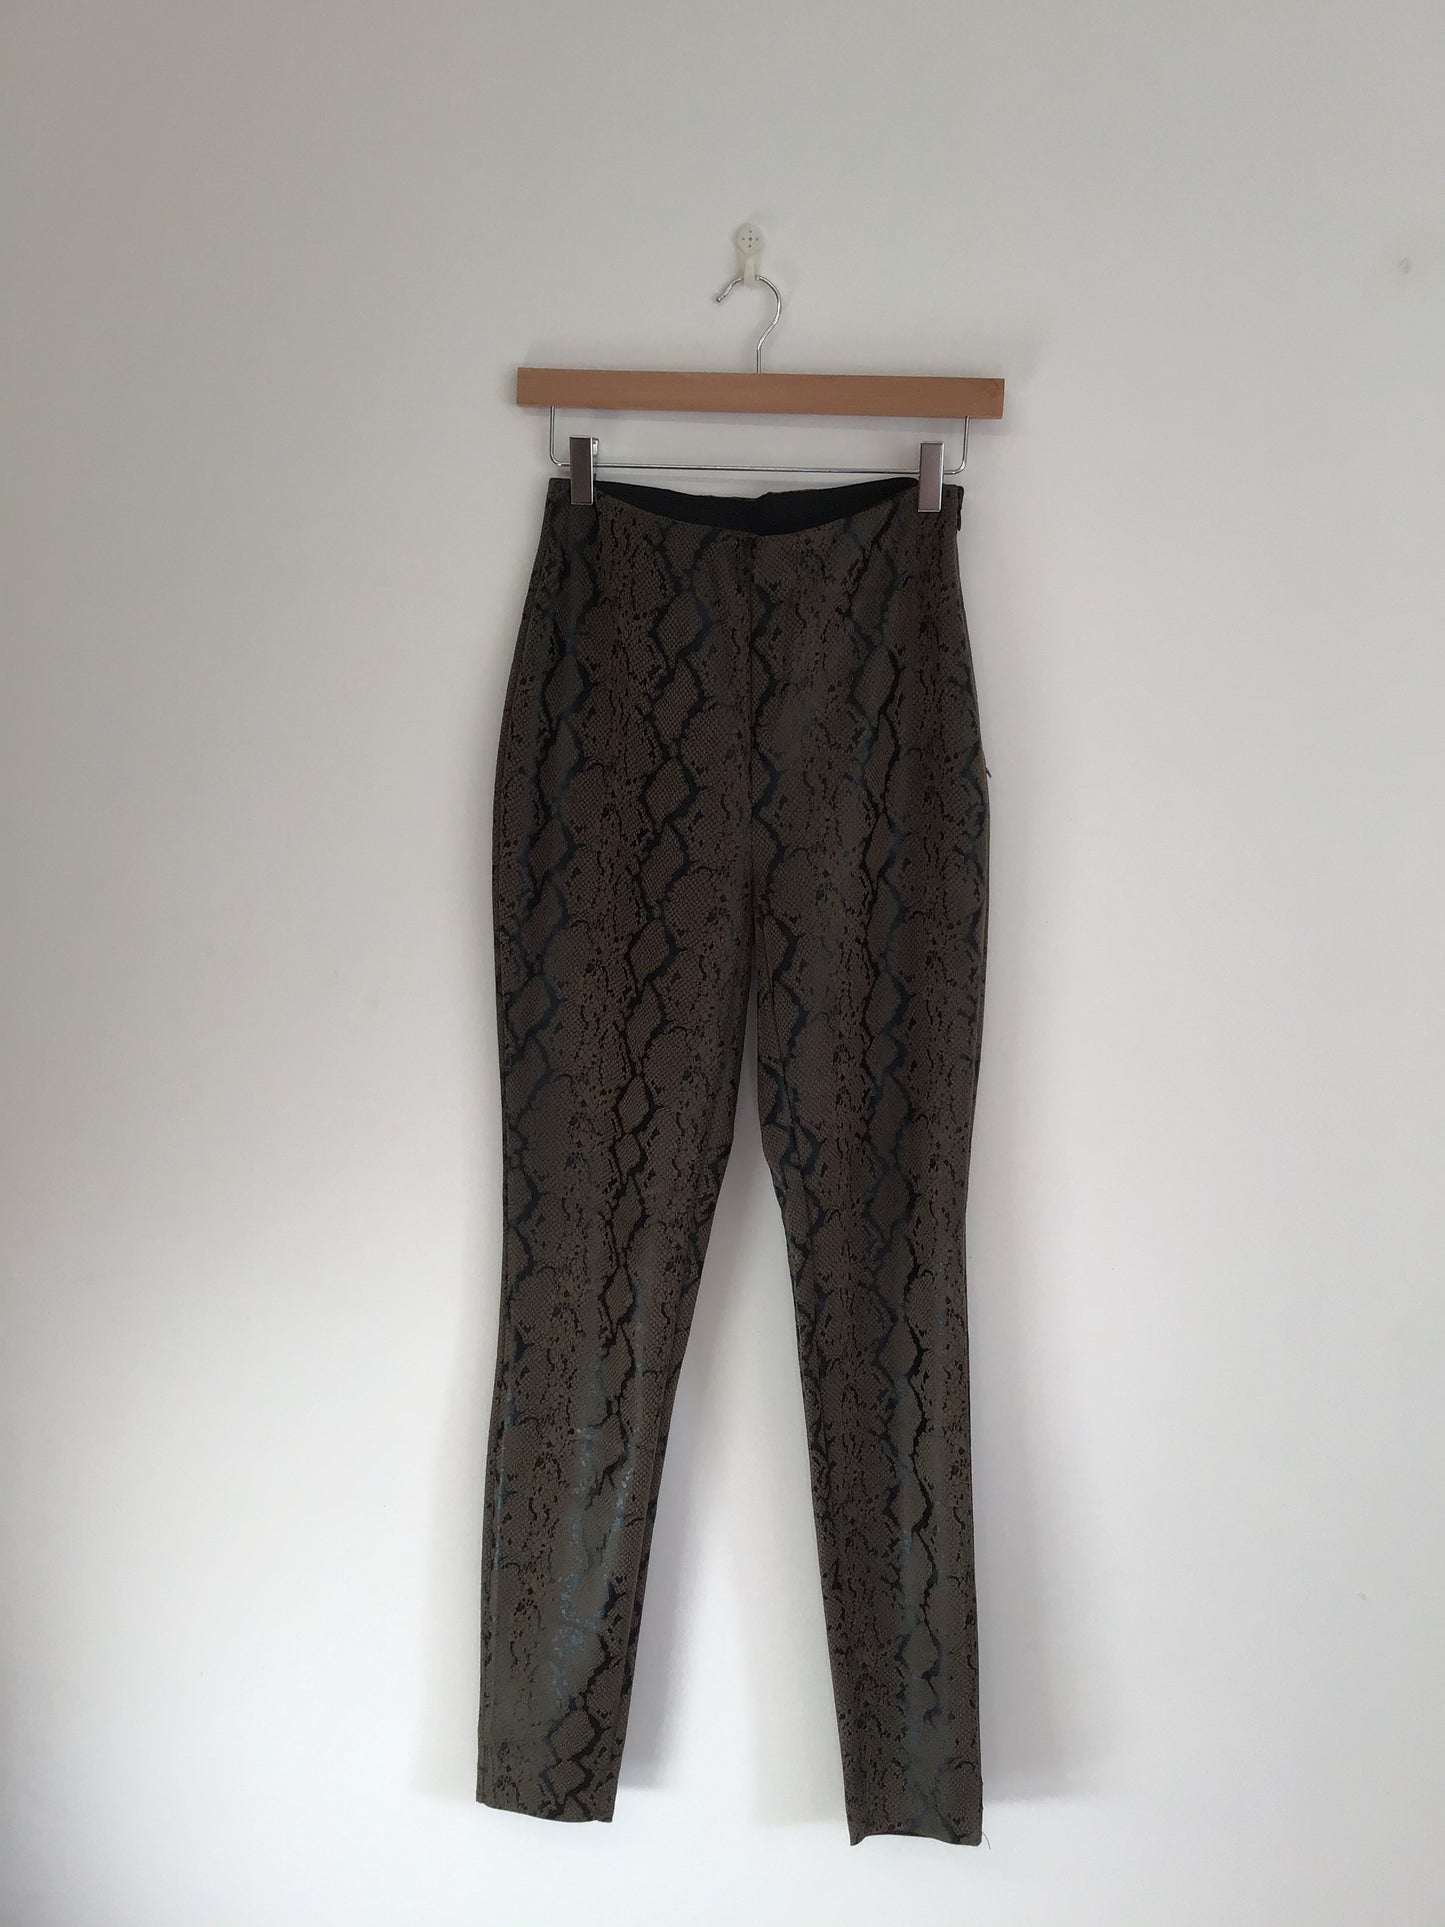 Snakeprint trousers